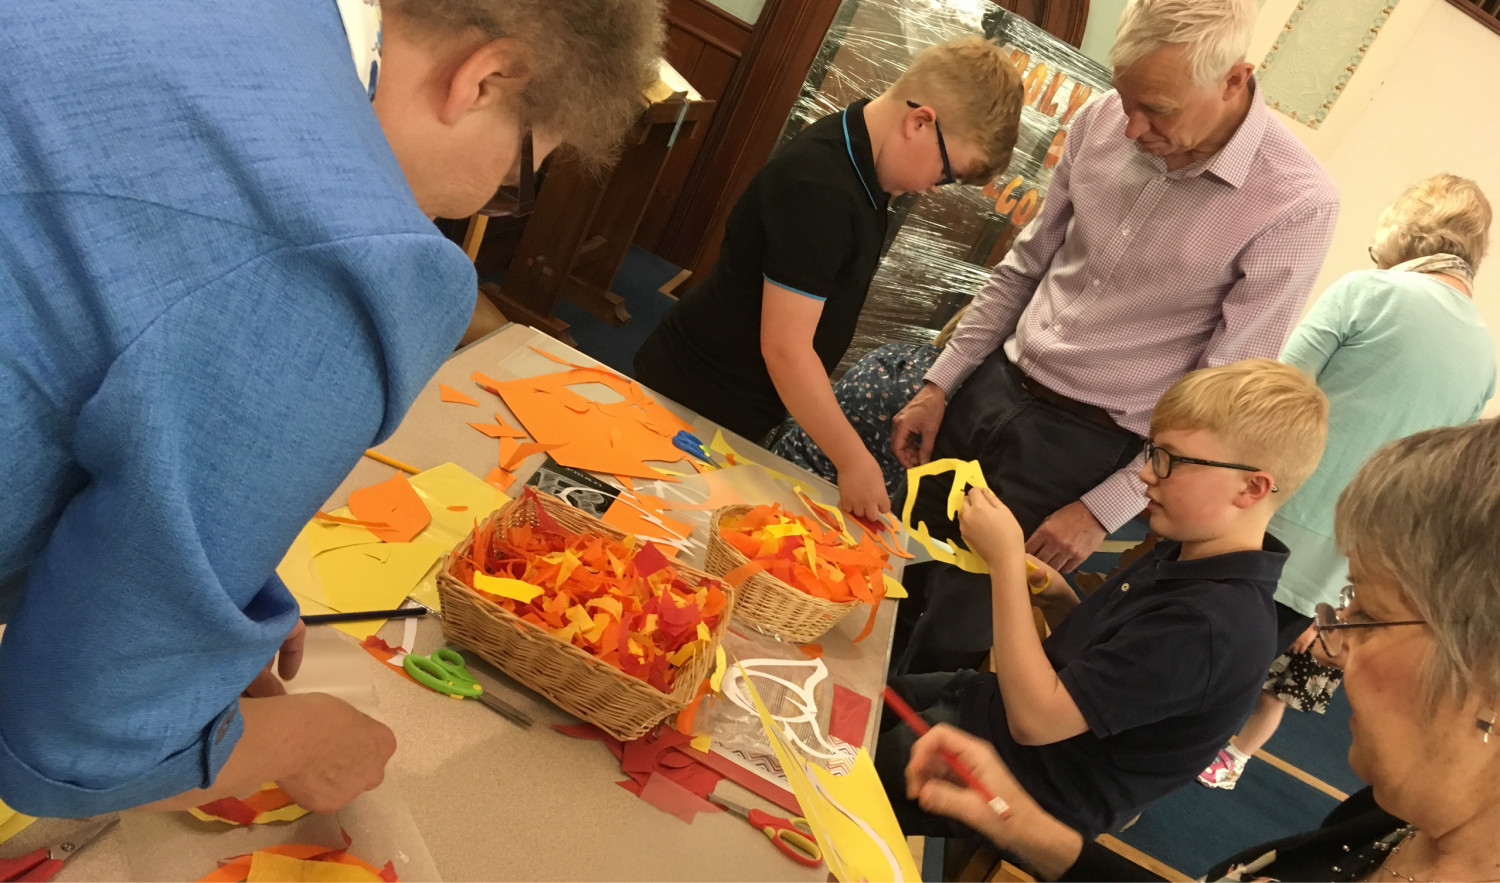 Adults and children engaging in a craft activity around a table